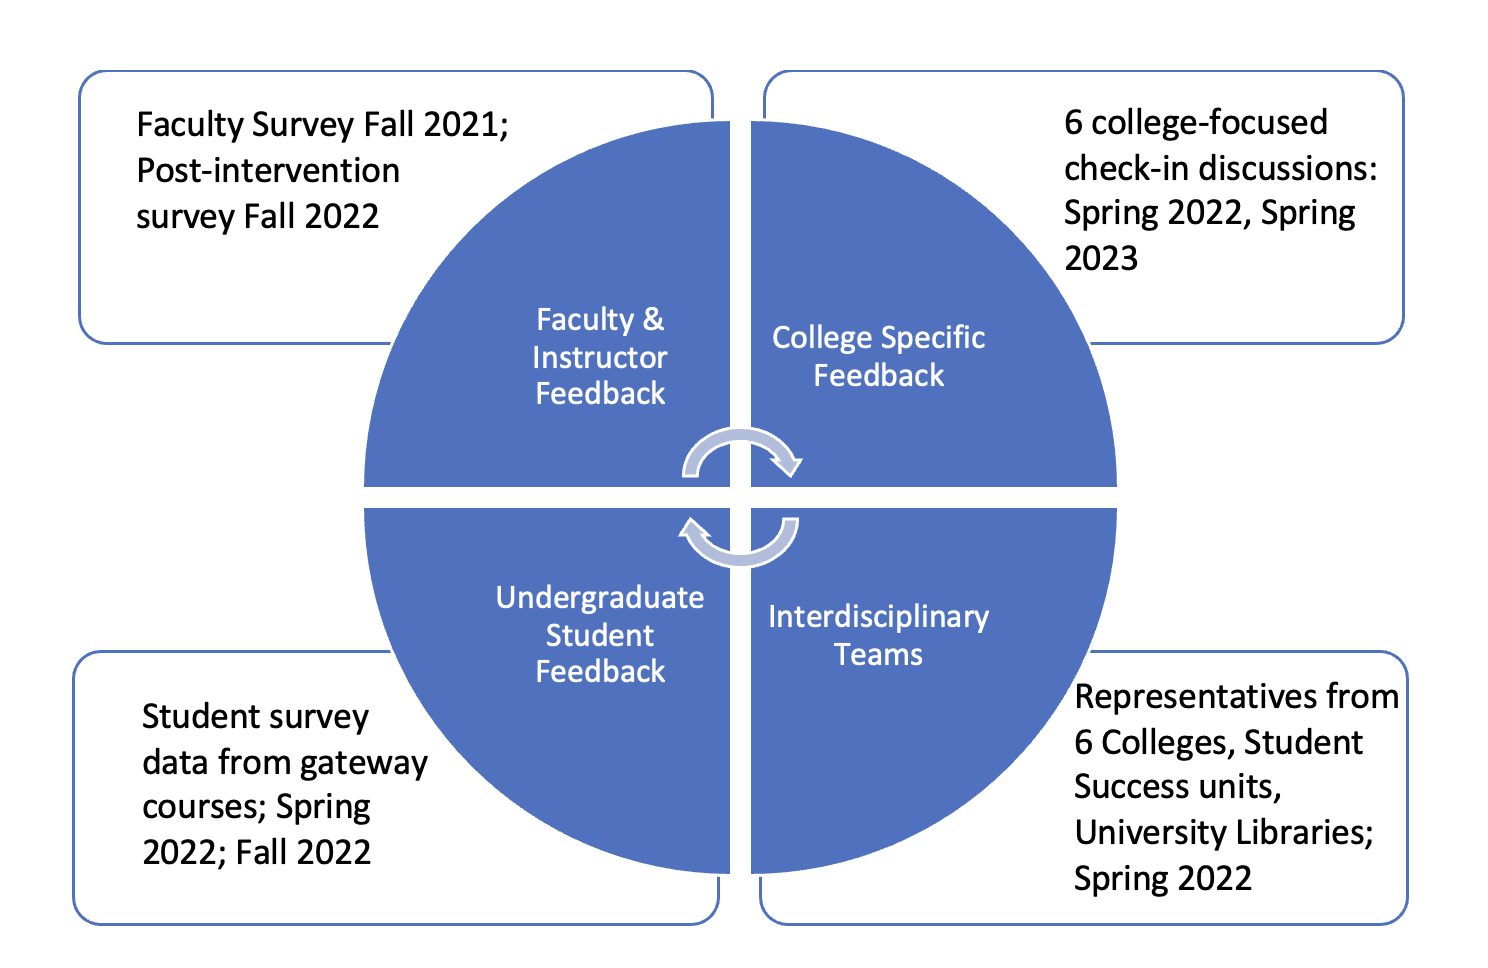 Four areas of feedback collected: Faculty and Instructor Feedback, College Specific Feedback, Undergraduate Student Feedback, Interdisciplinary Teams